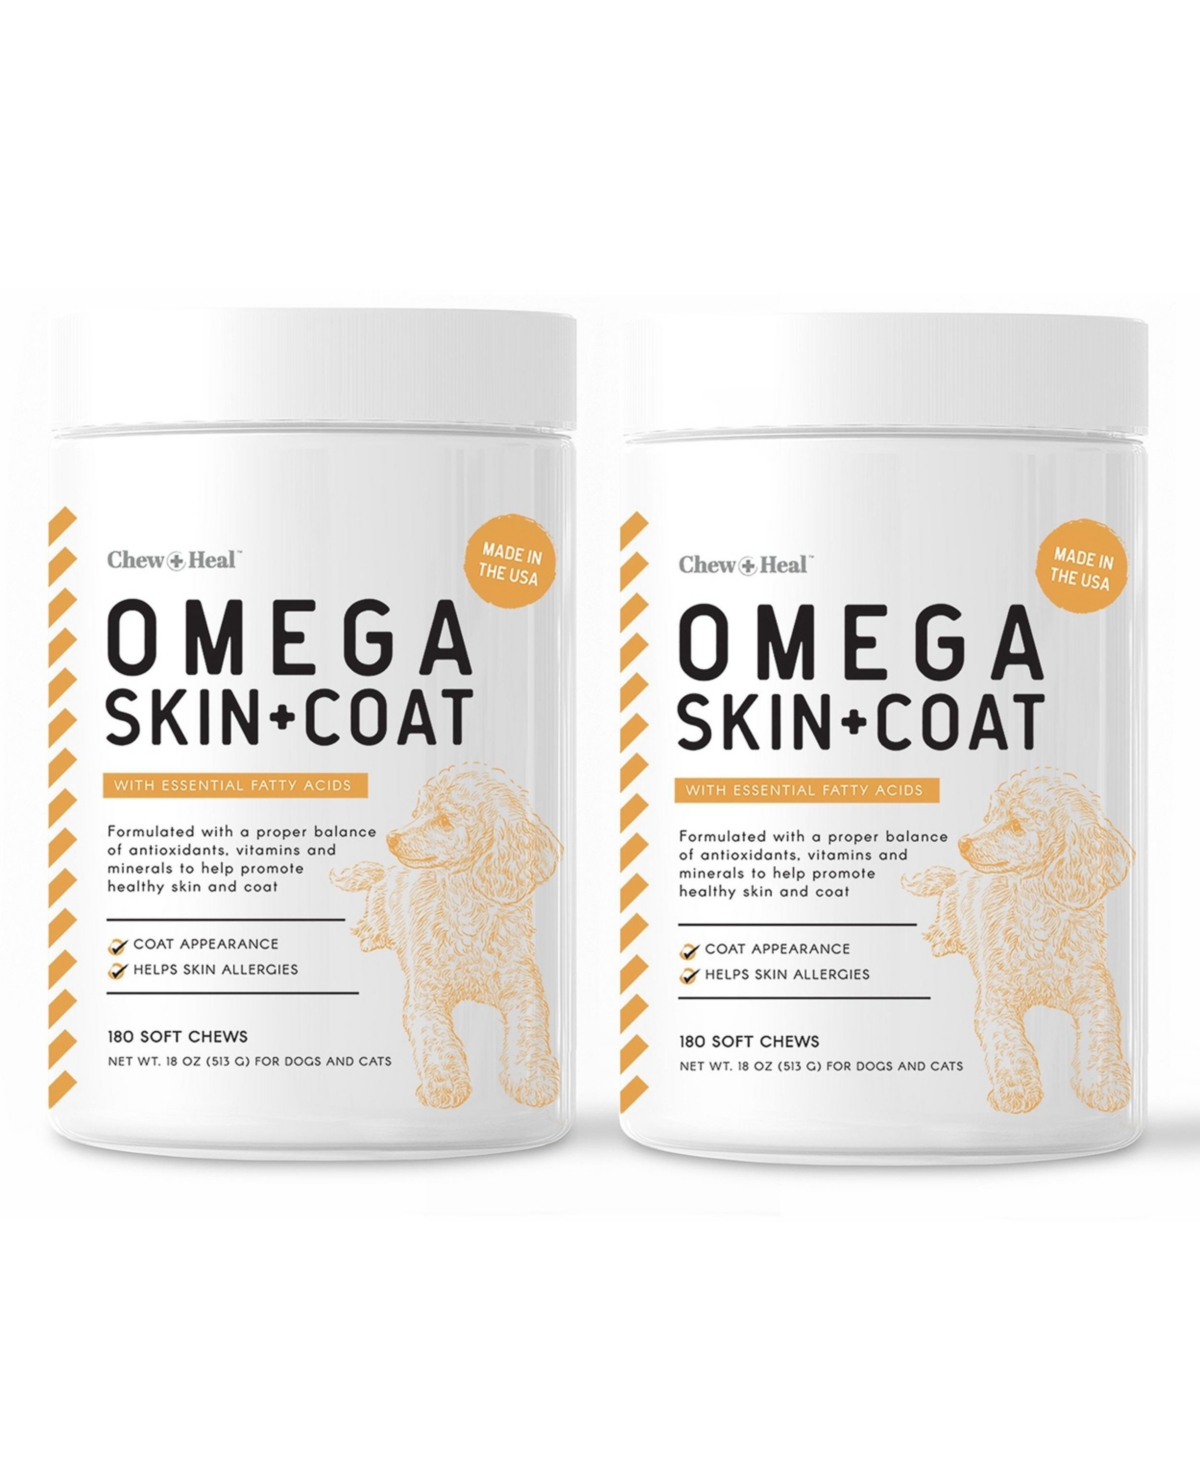 Omega Skin + Coat Fish Oil Supplement for Dogs - 360 Delicious Chews